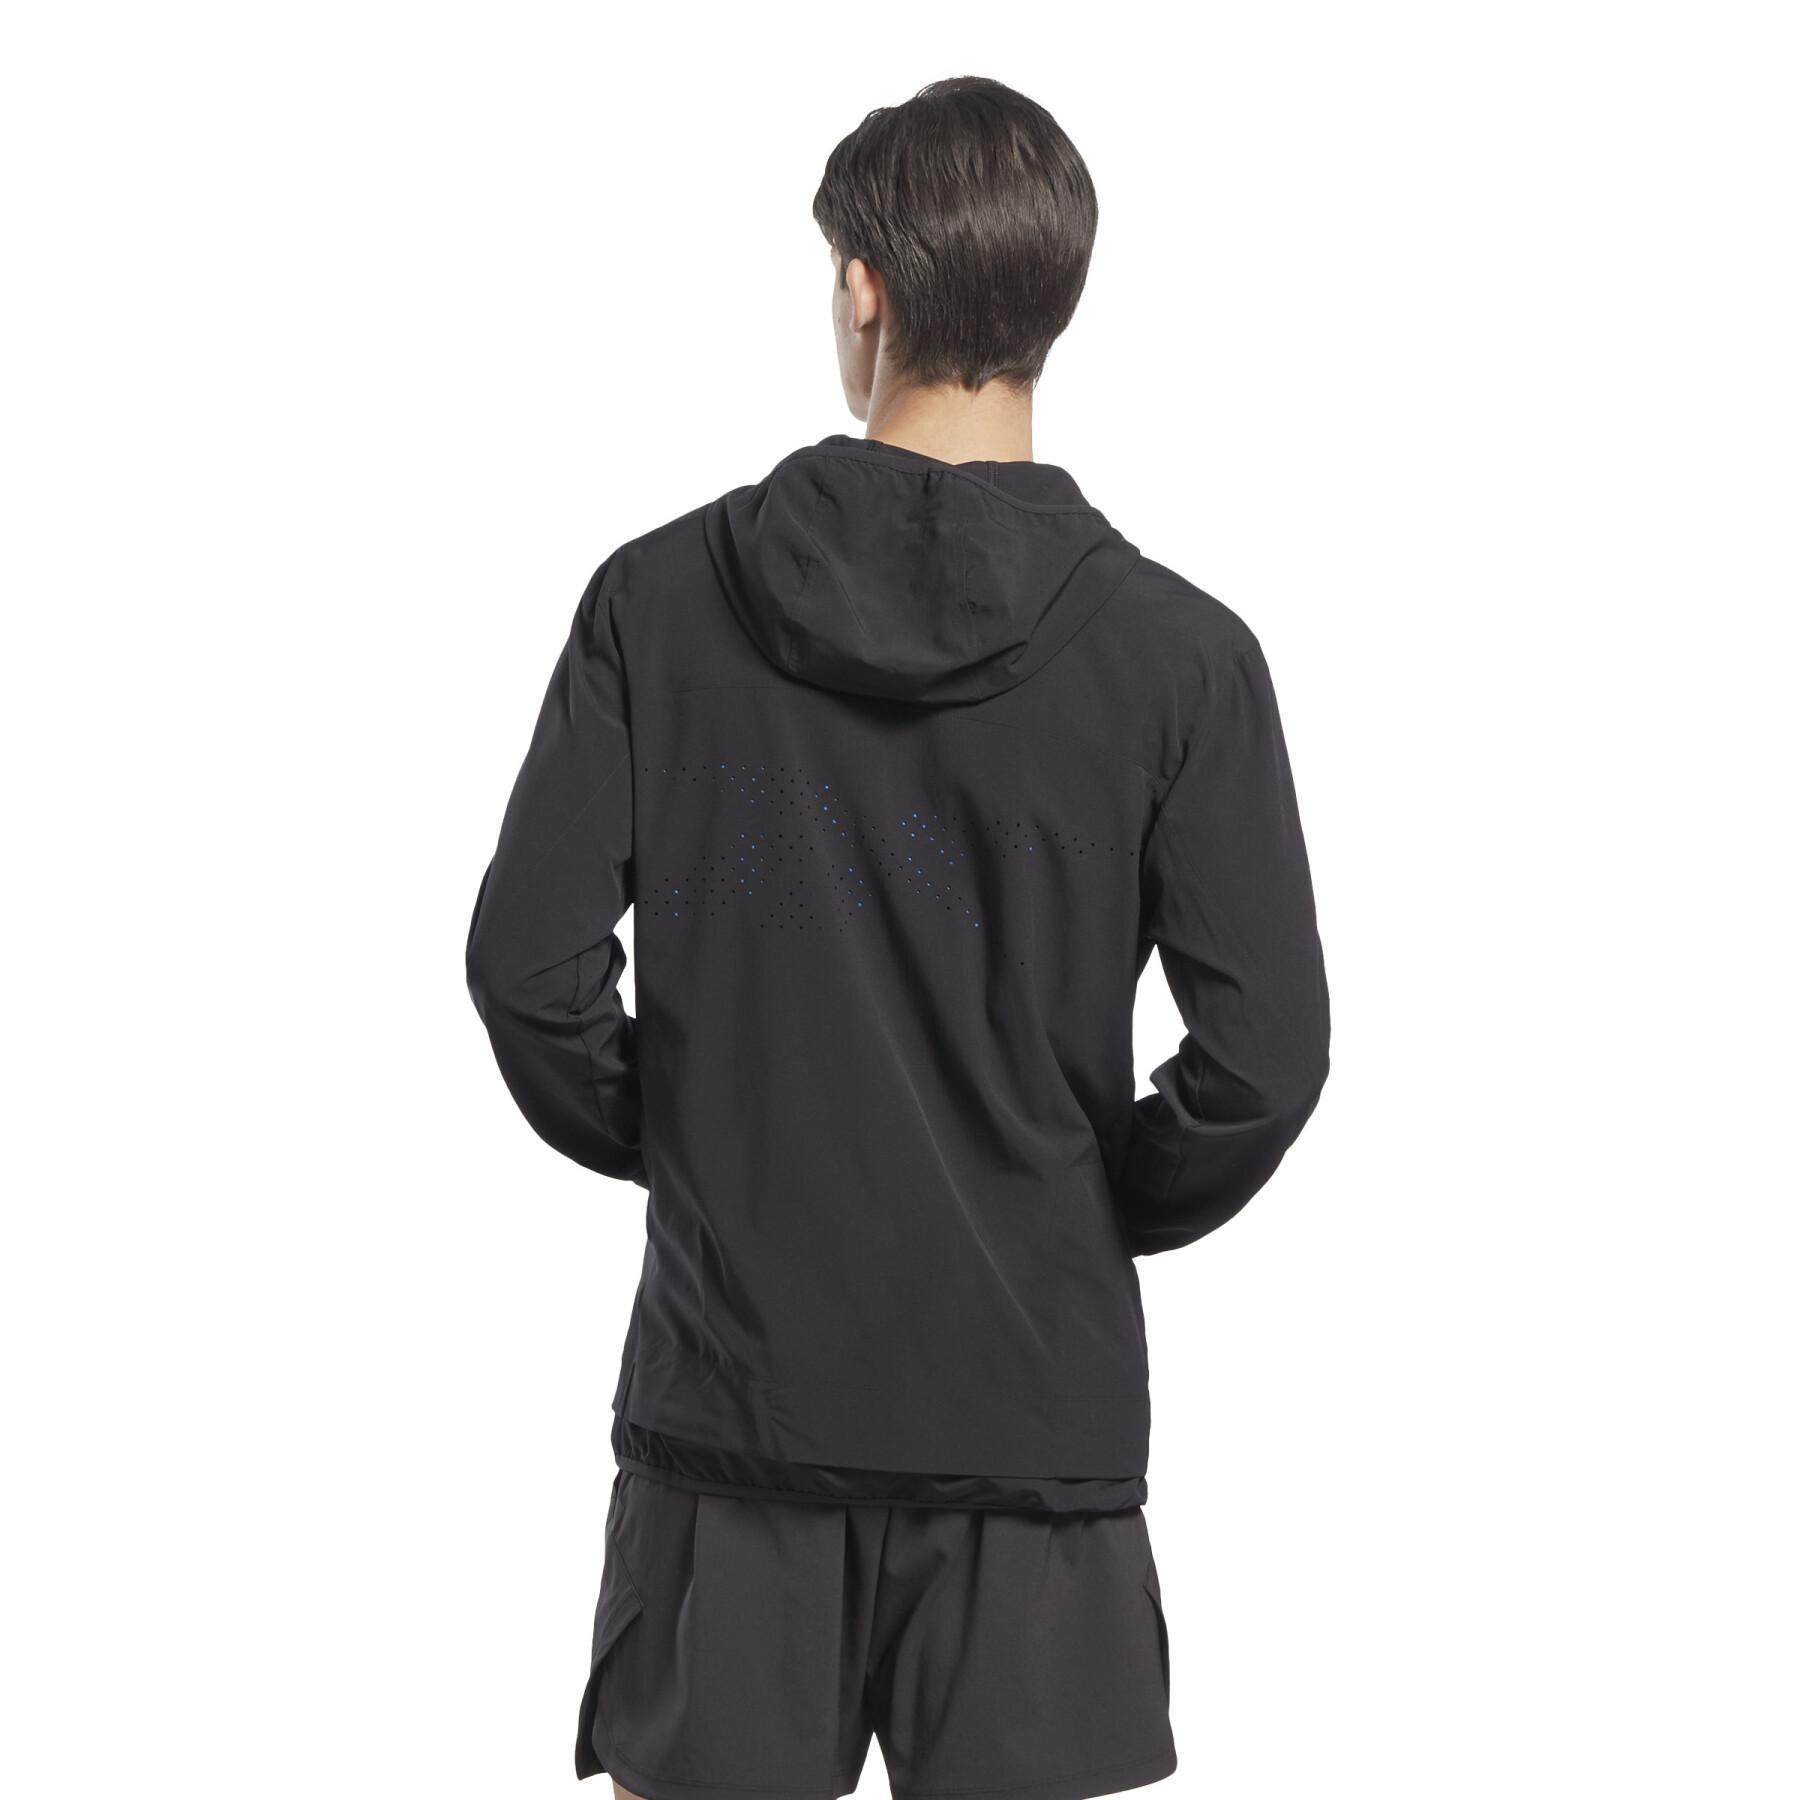 Chaqueta impermeable Reebok Performance Certified Vector